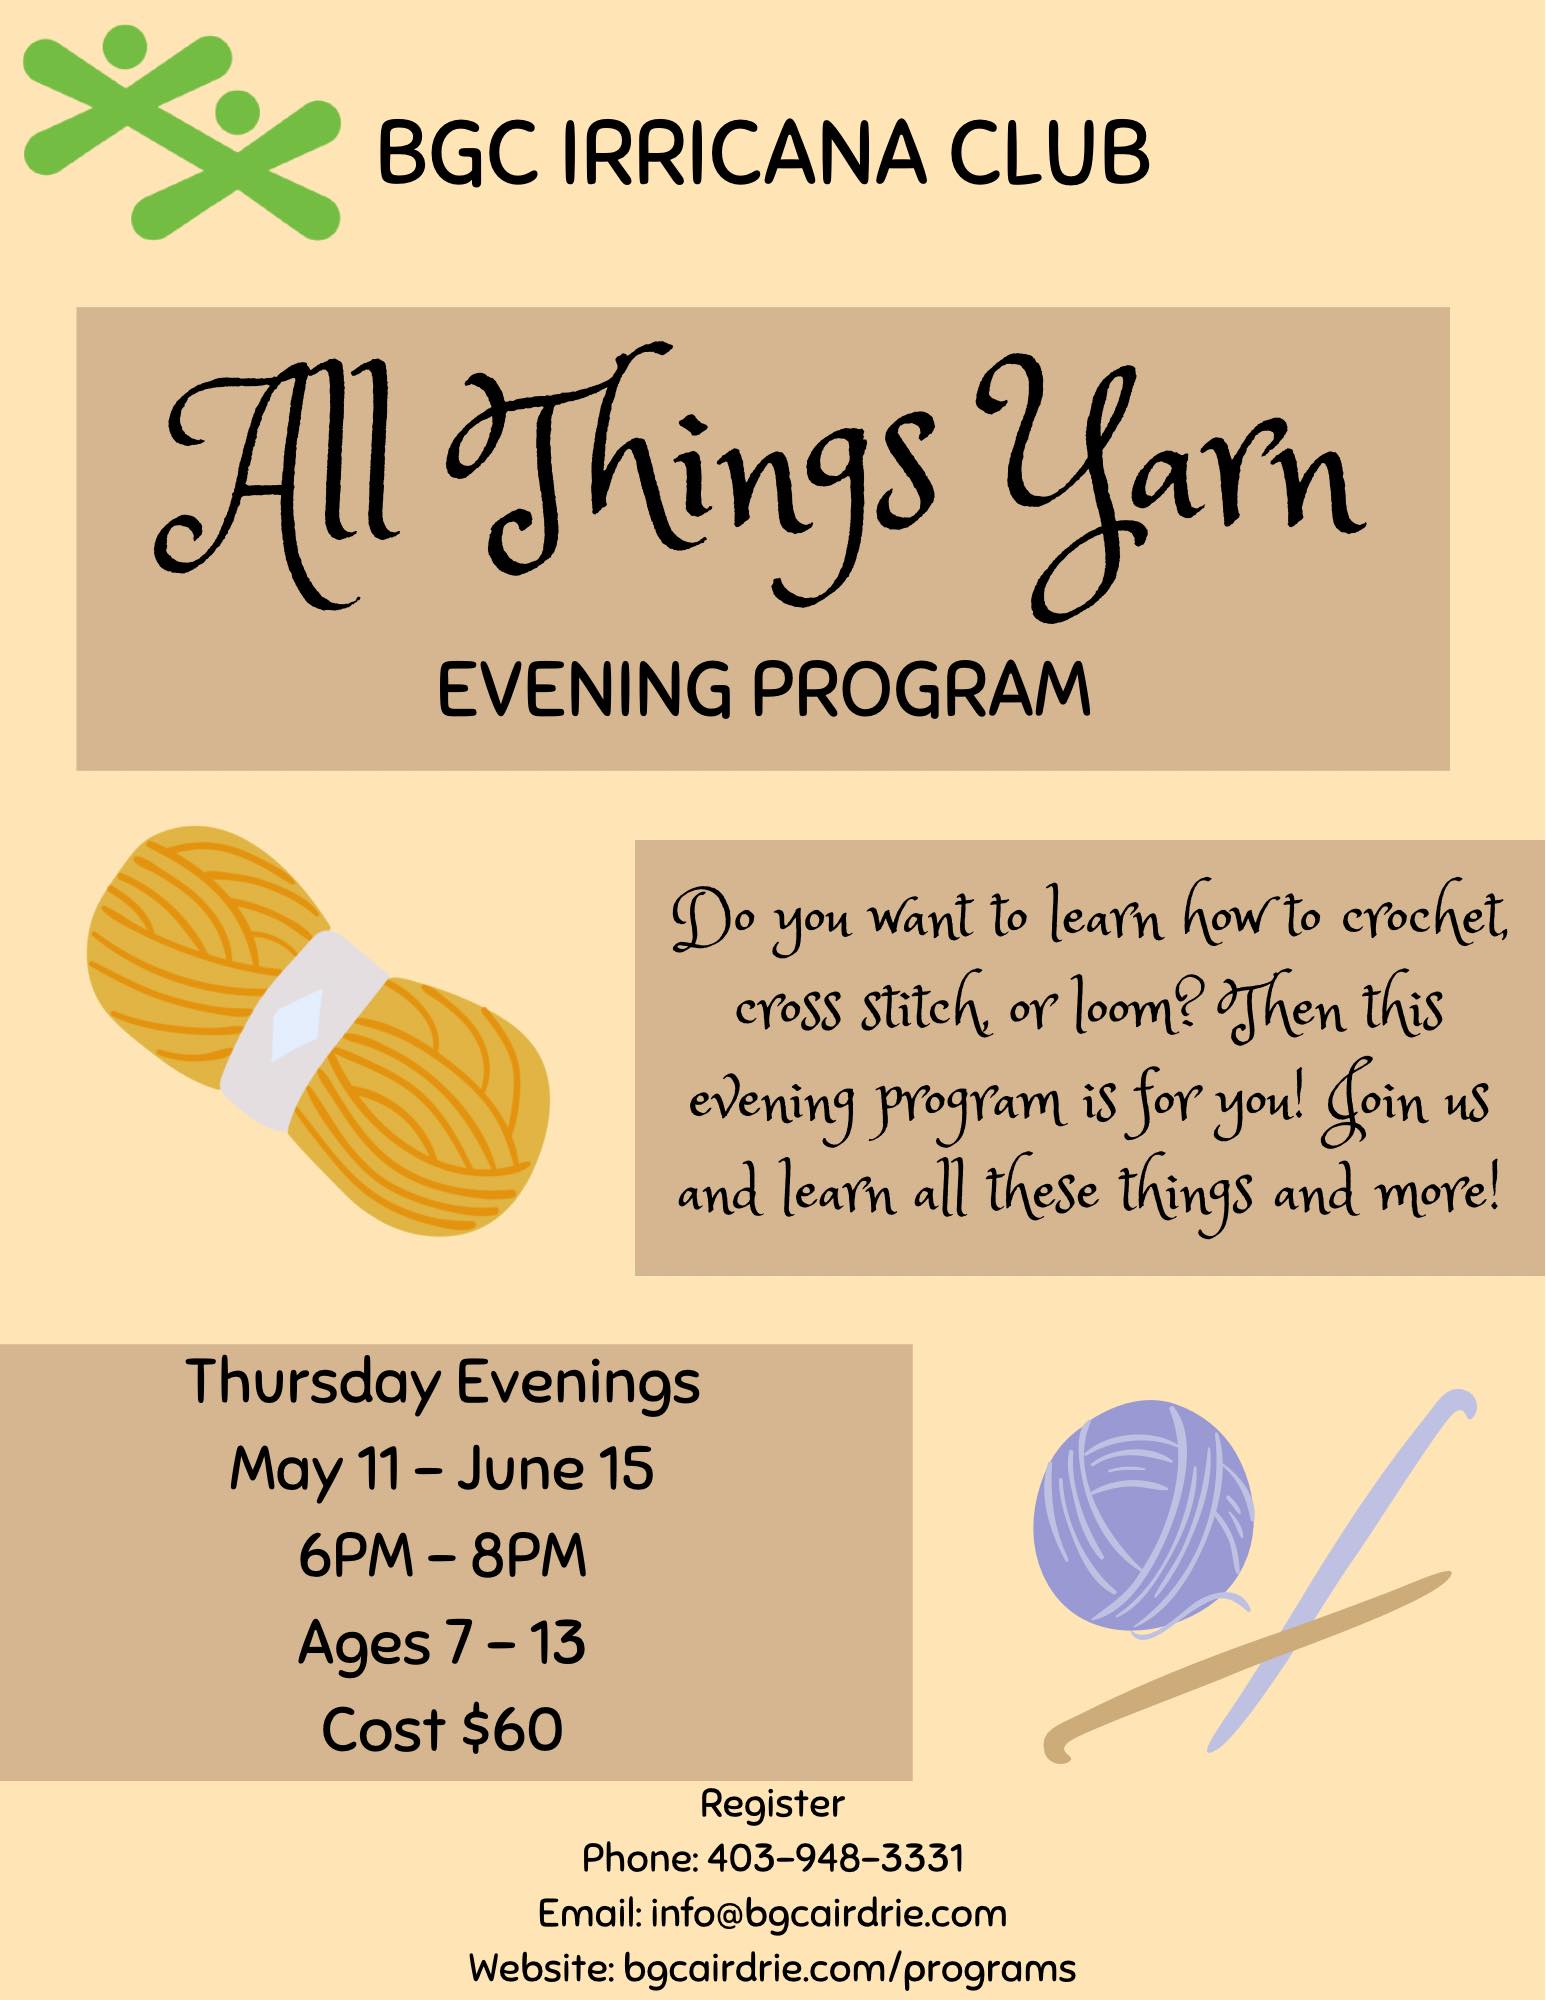 All Things Yarn - Evening Program (Irricana) Age range: 7-13 Do you want to learn how to crochet, cross stitch, or loom? Then this evening program is for you! Join us and learn all these things and more!